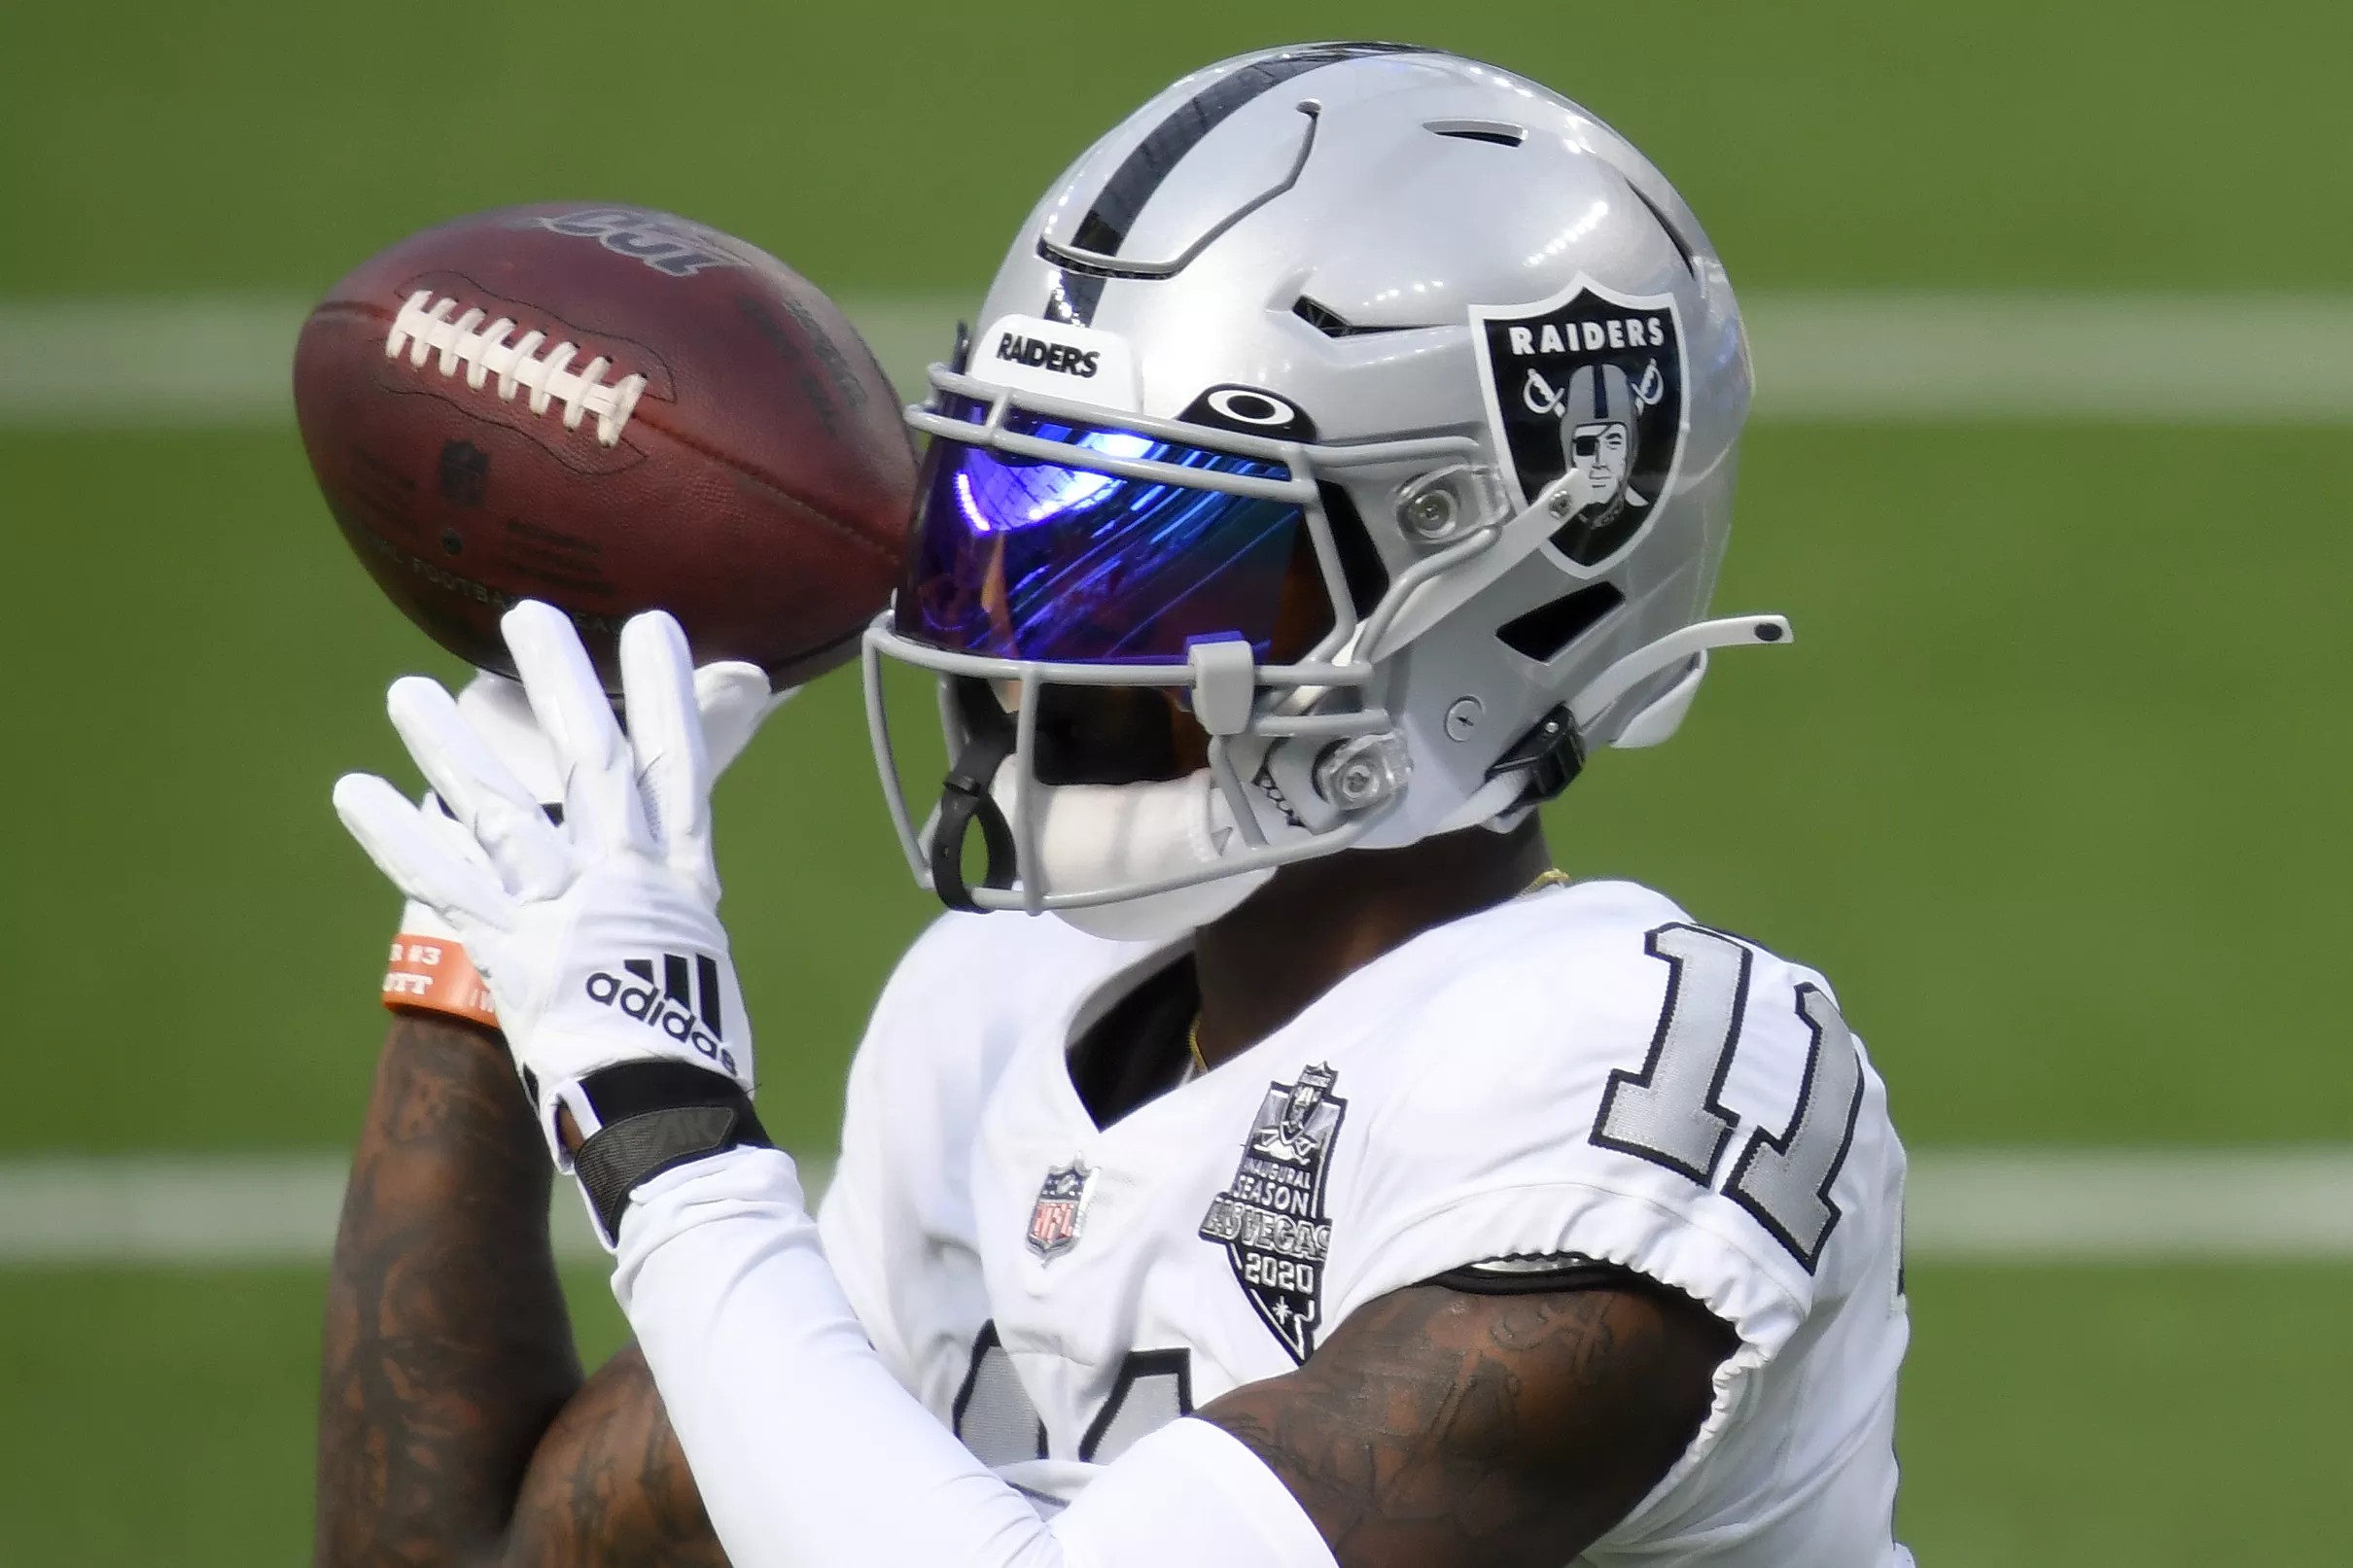 Checking in on Raiders rookie WR Henry Ruggs III at the midpoint of the